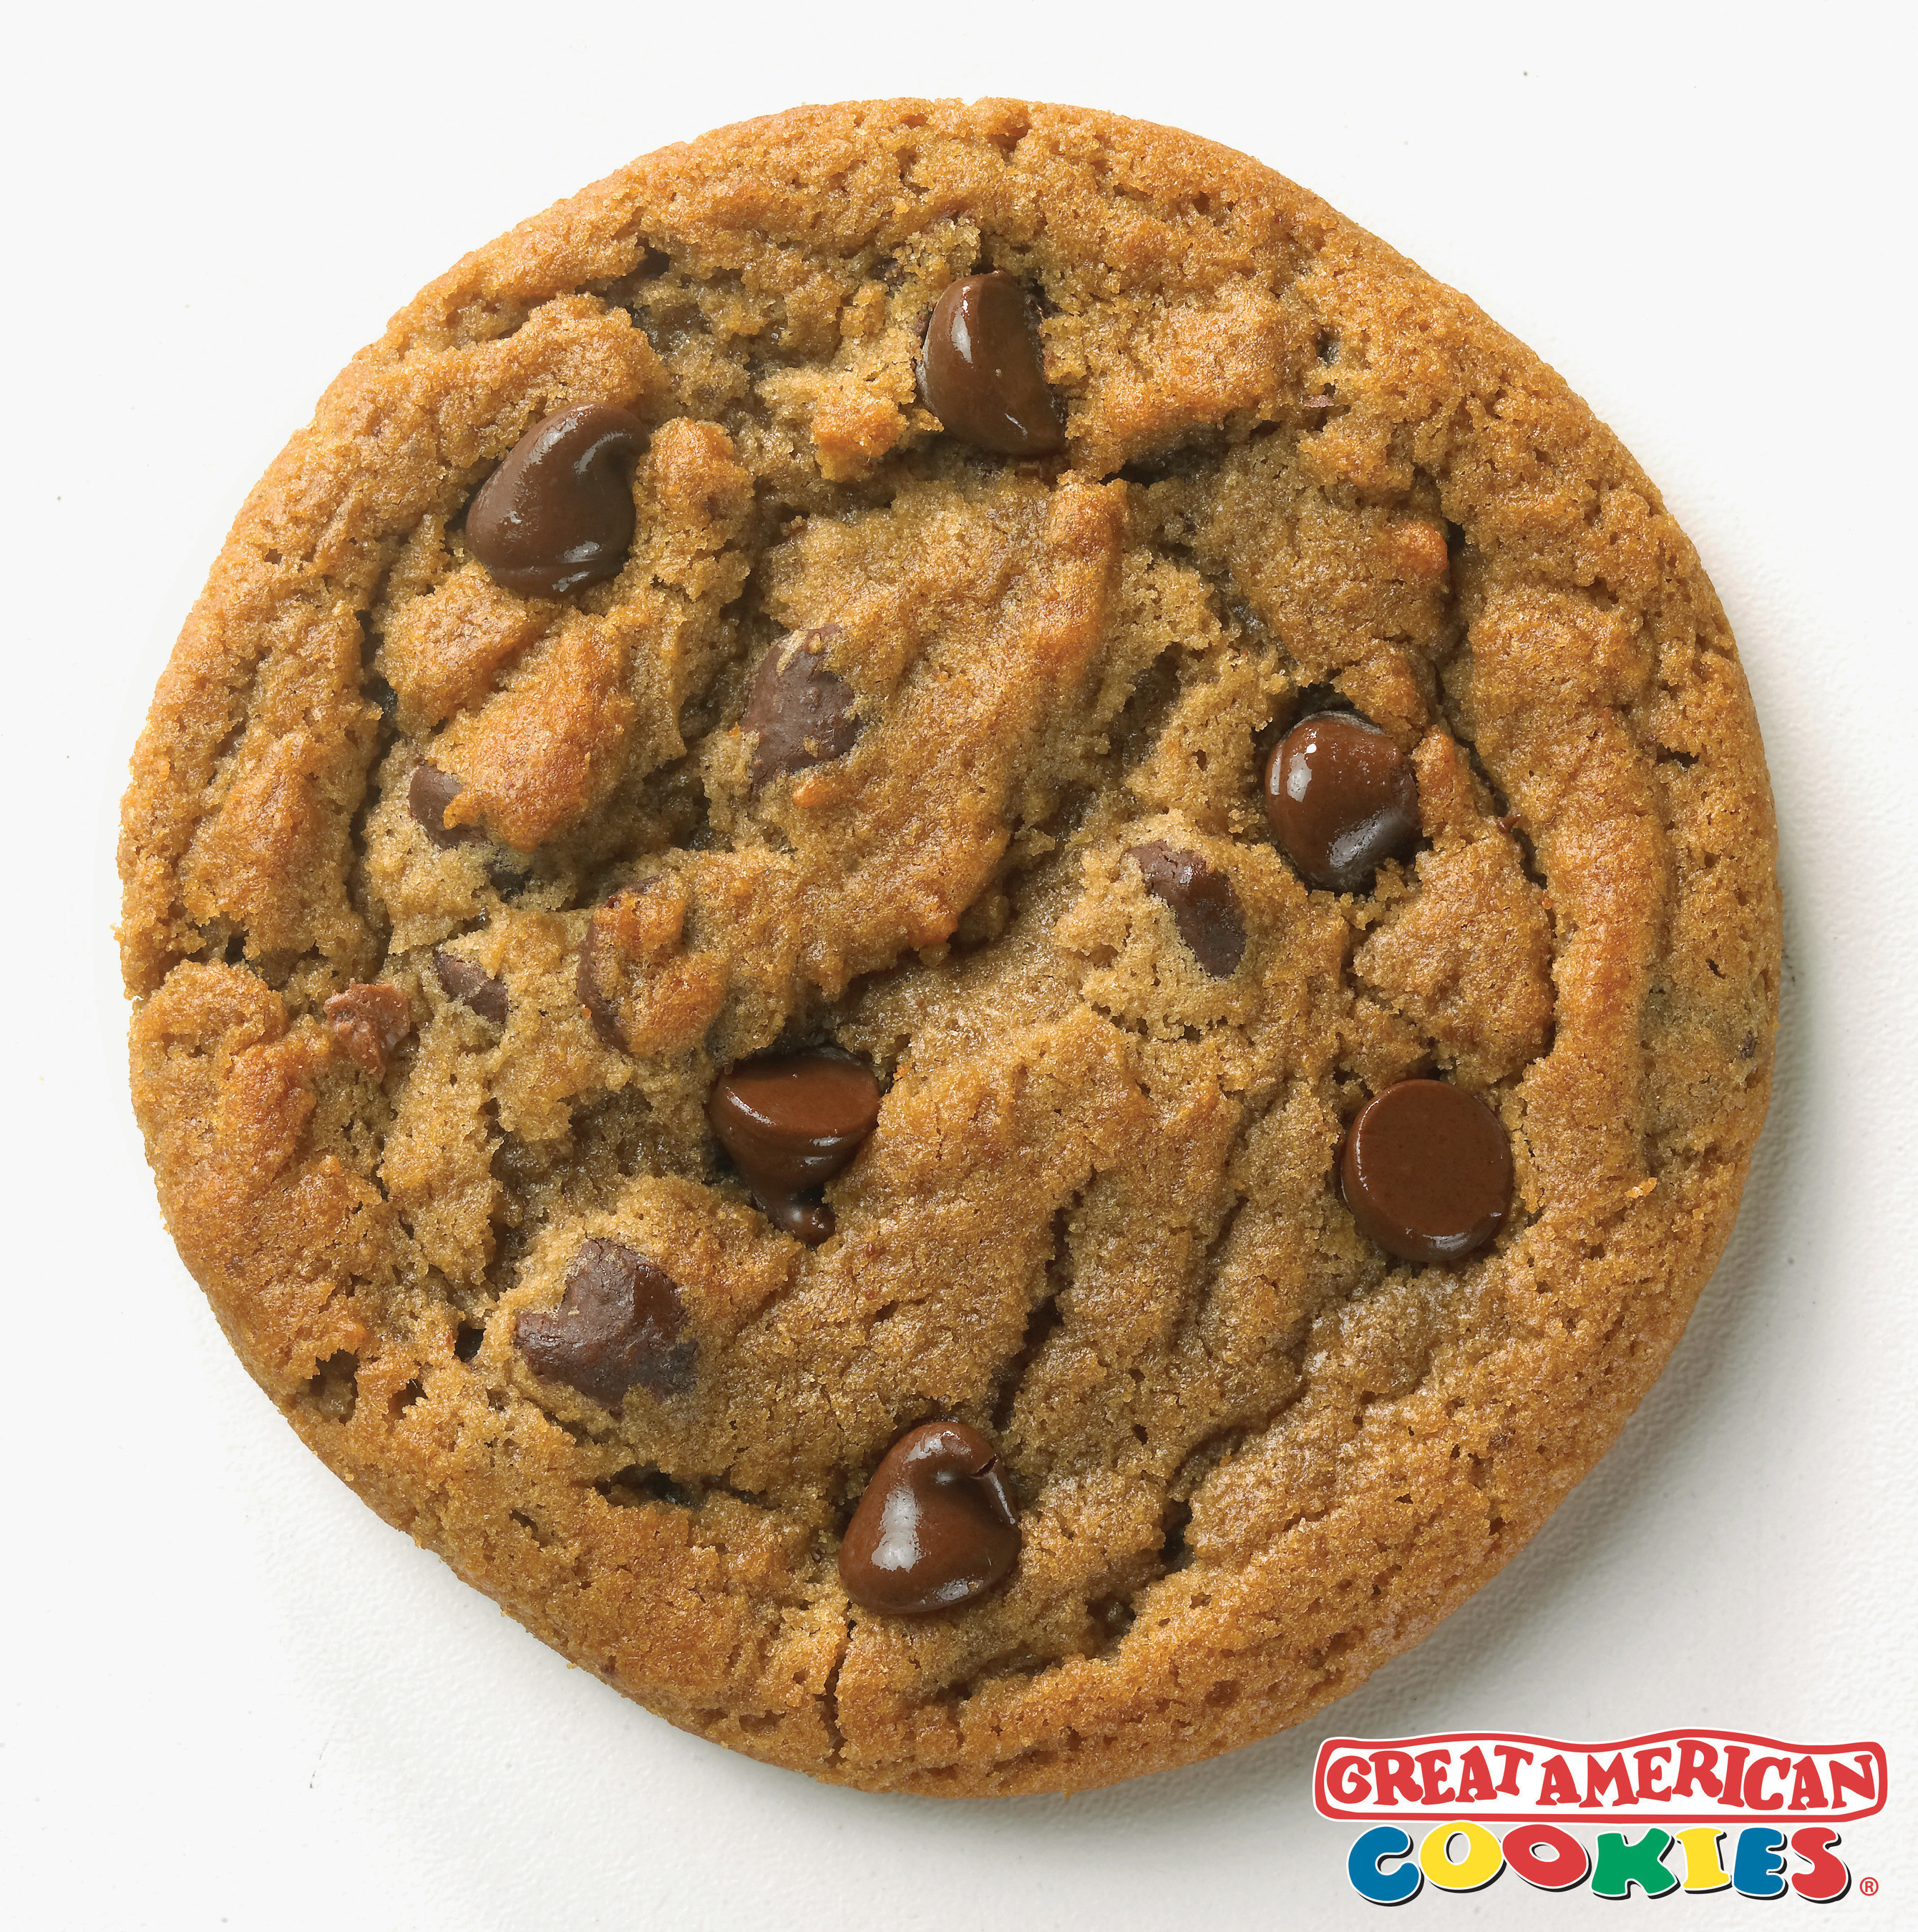 Great American Cookies® Makes Tax Day Sweet With One Free Cookie for All